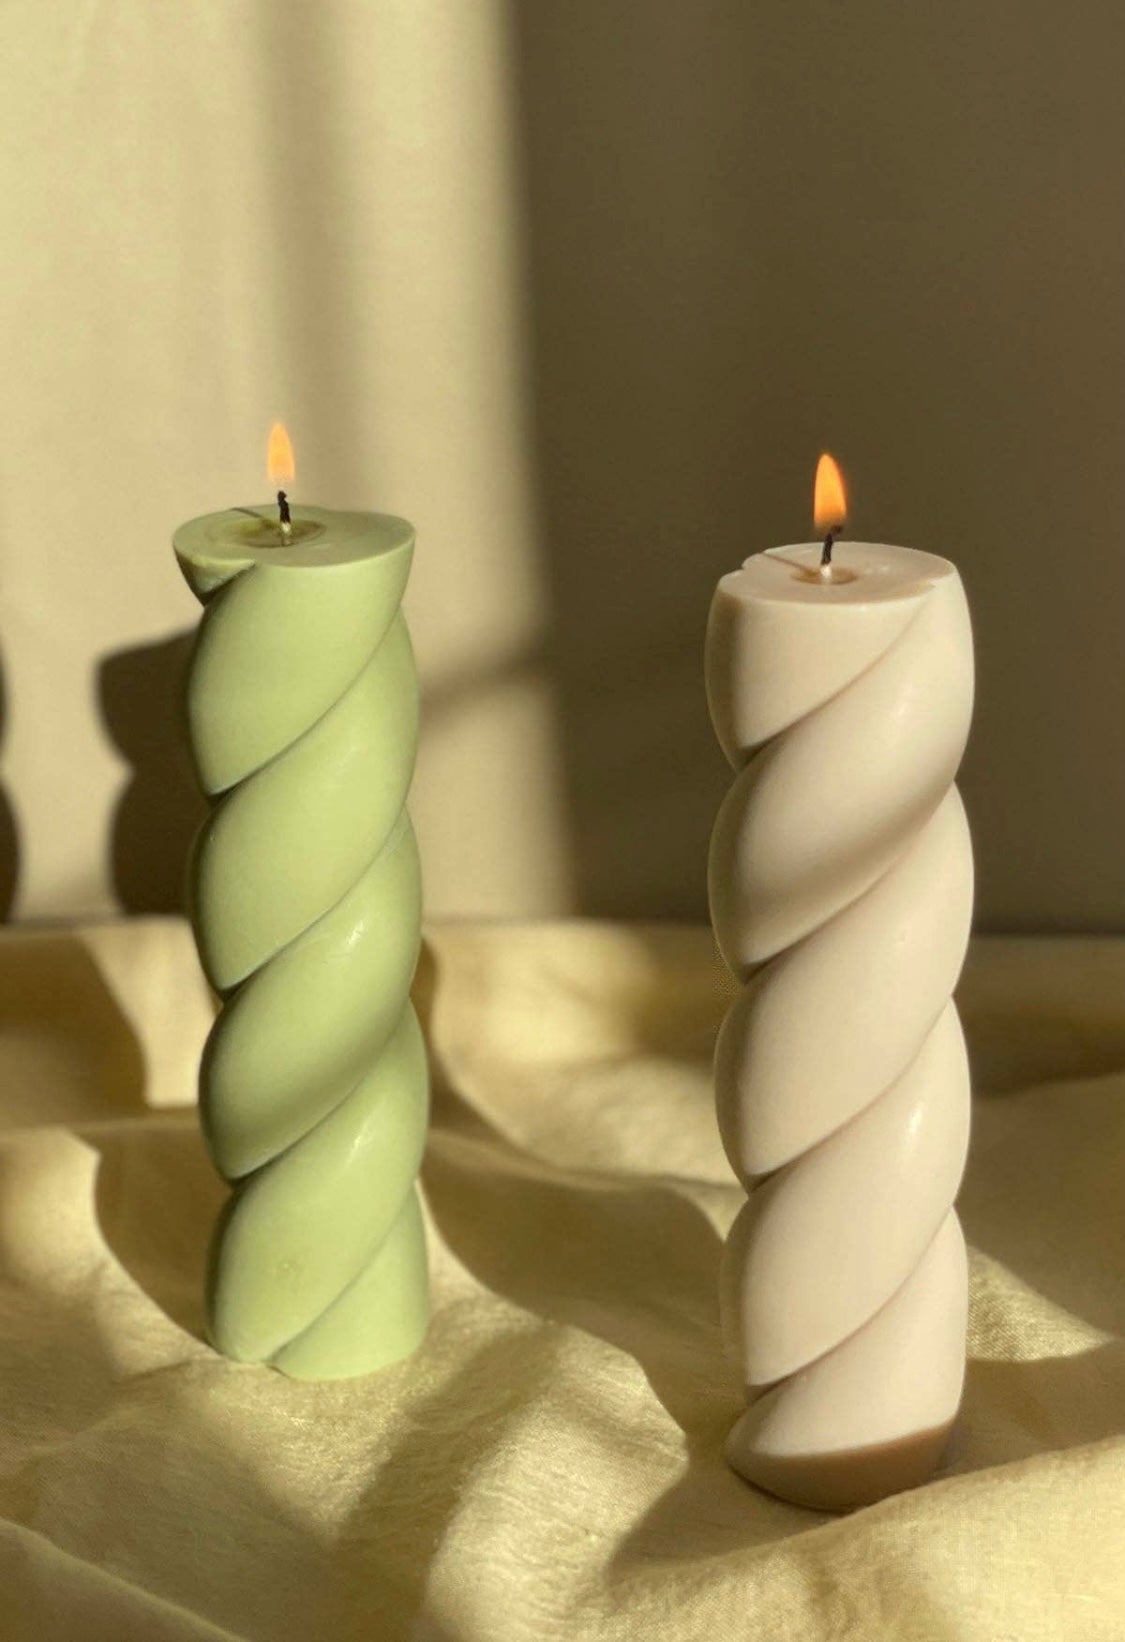 Marshmallow Candle